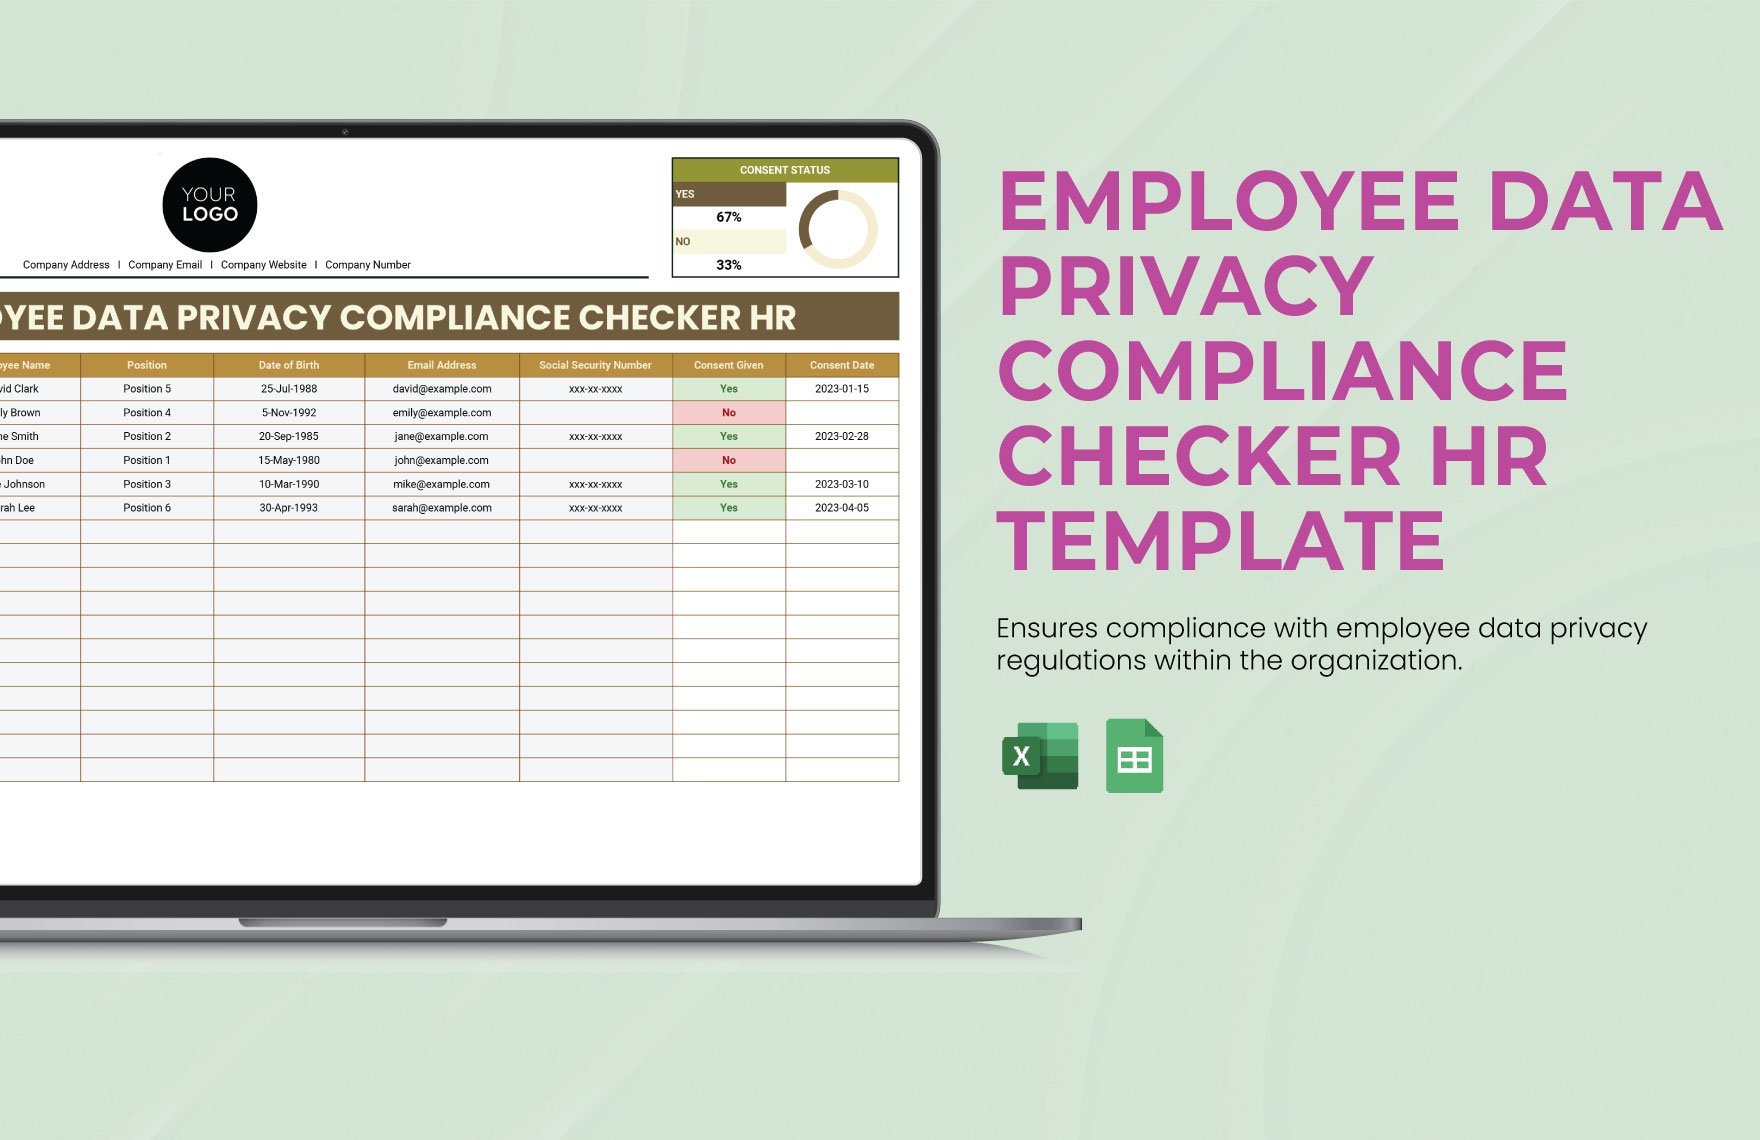 Employee Data Privacy Compliance Checker HR Template